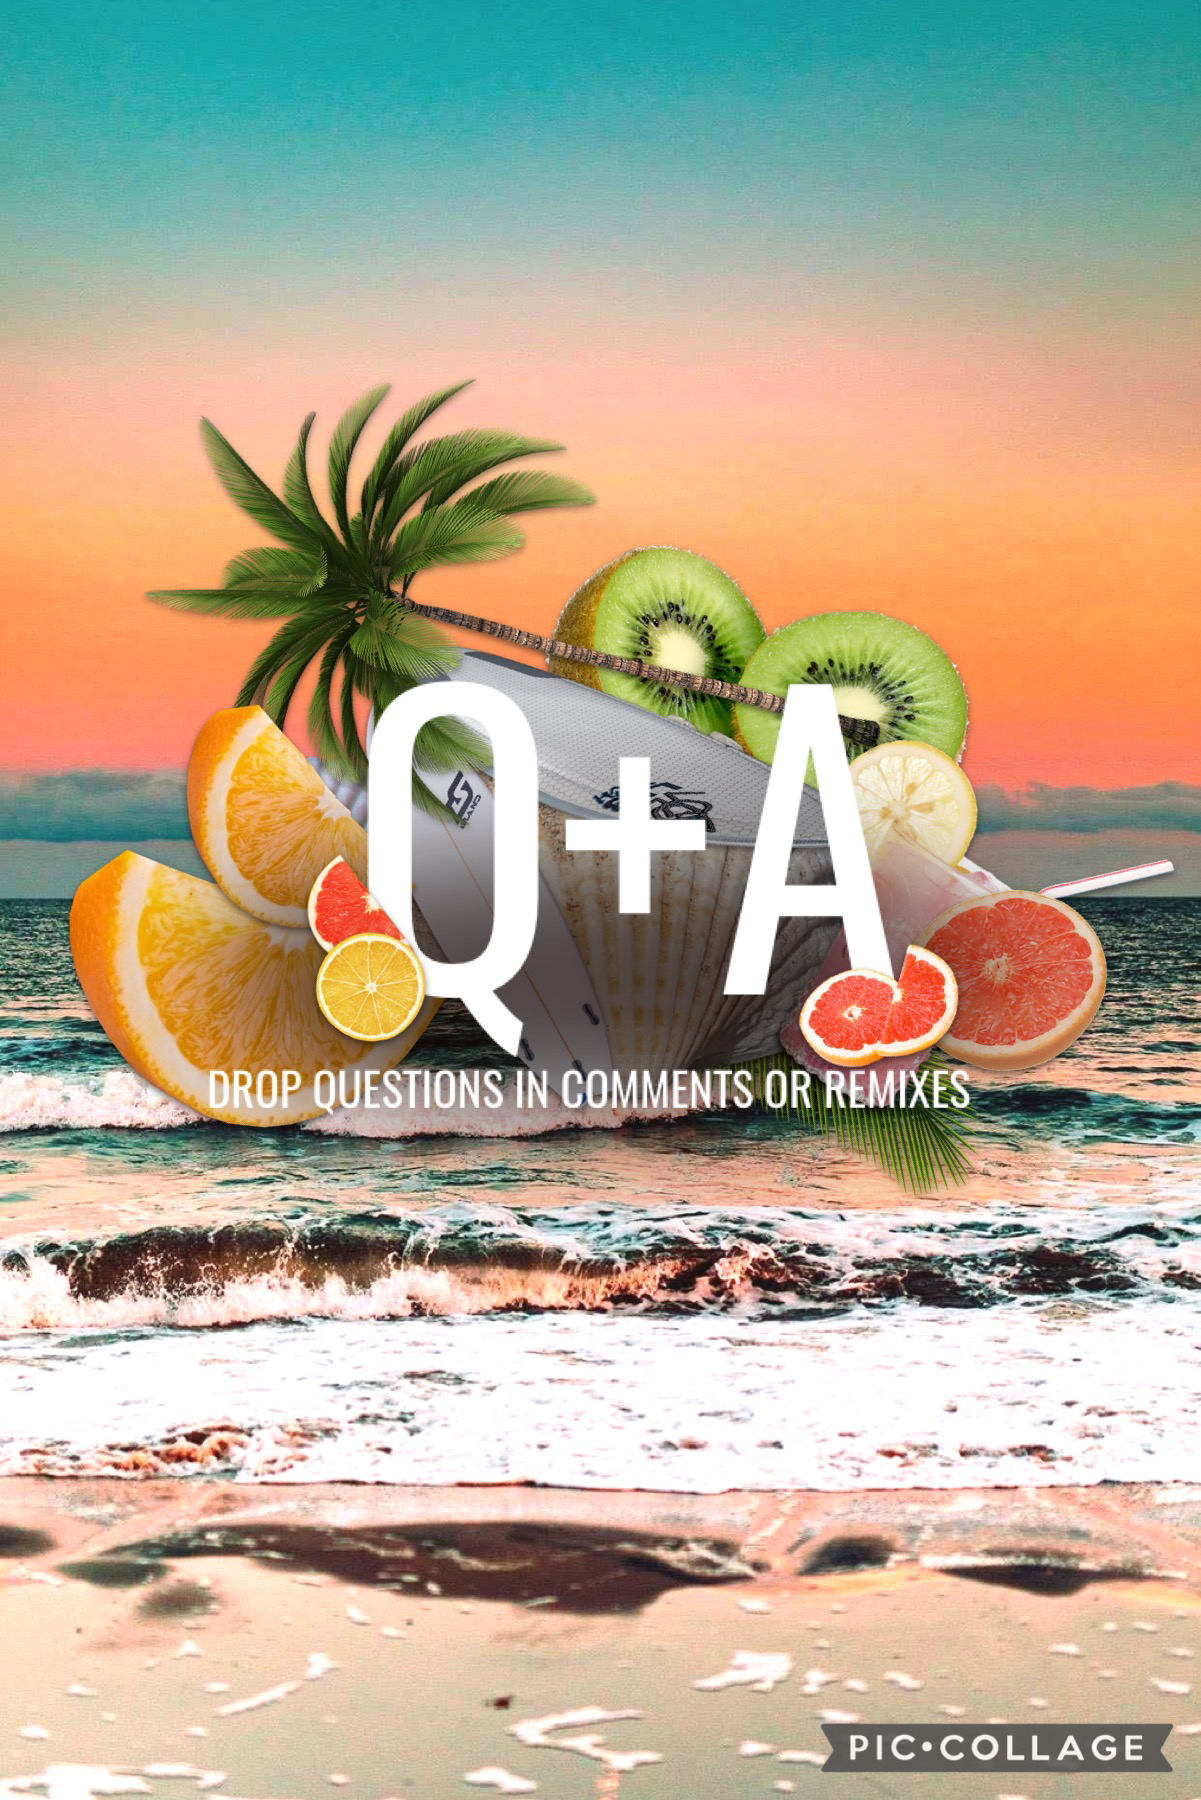 I’ve been seeing these for a while so I decided to make one too! Happy summer ☀️ 
Layout inspired by @castlescience!
Tags: #summer #beach #qna